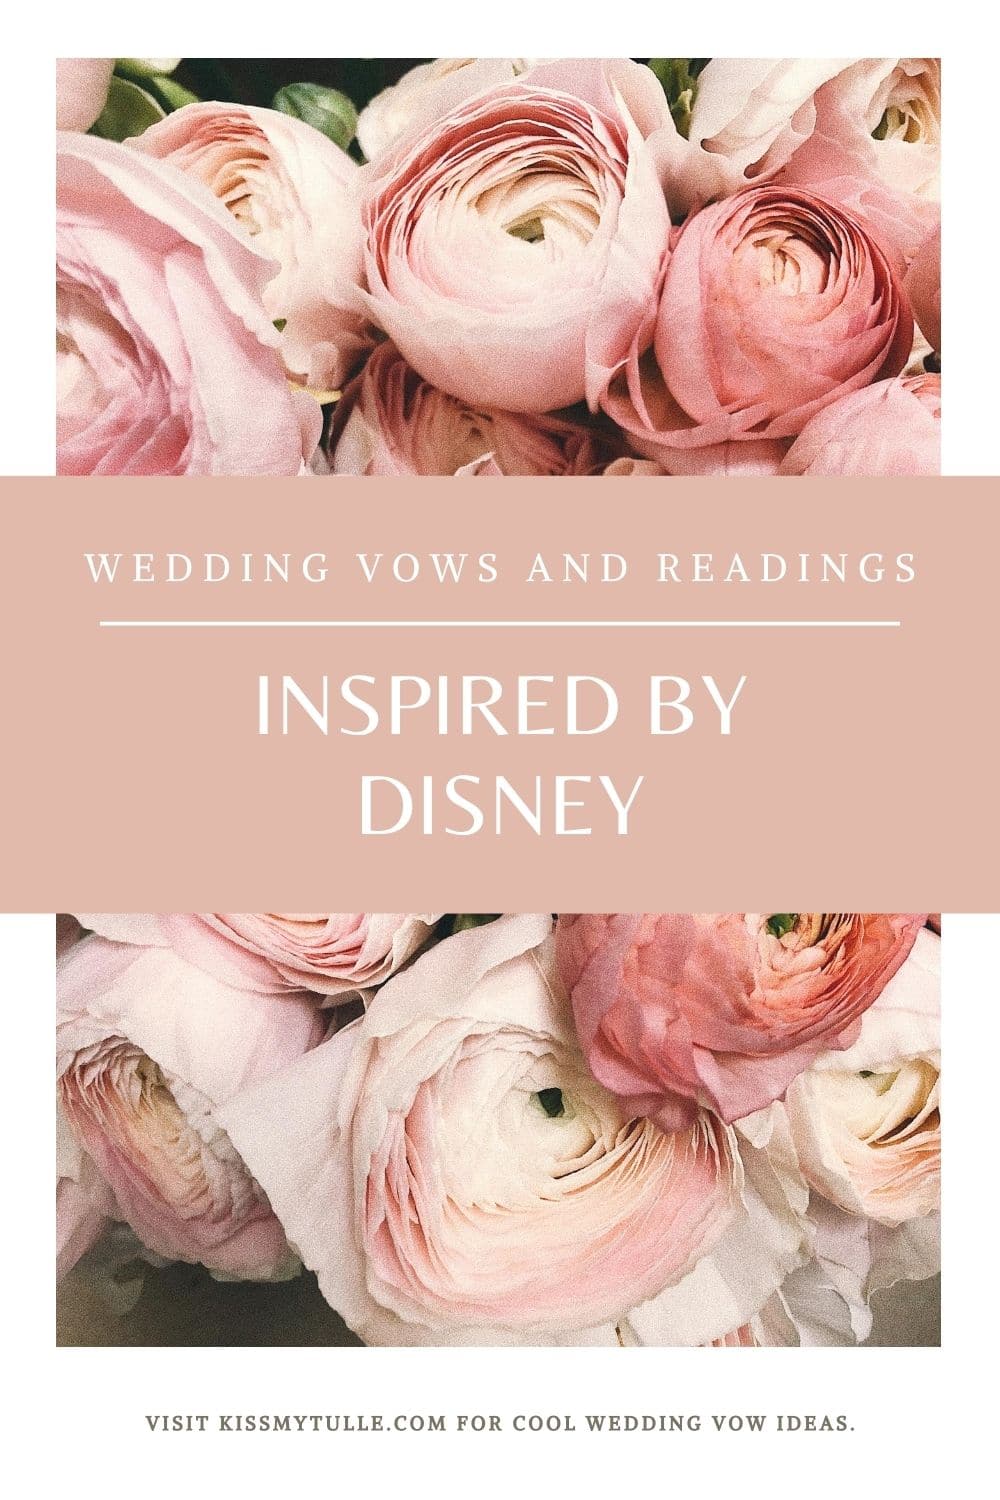 Looking for alternative vows or readings for your wedding? Here's a few with a fun and familiar lean from the wonderful world of Disney.